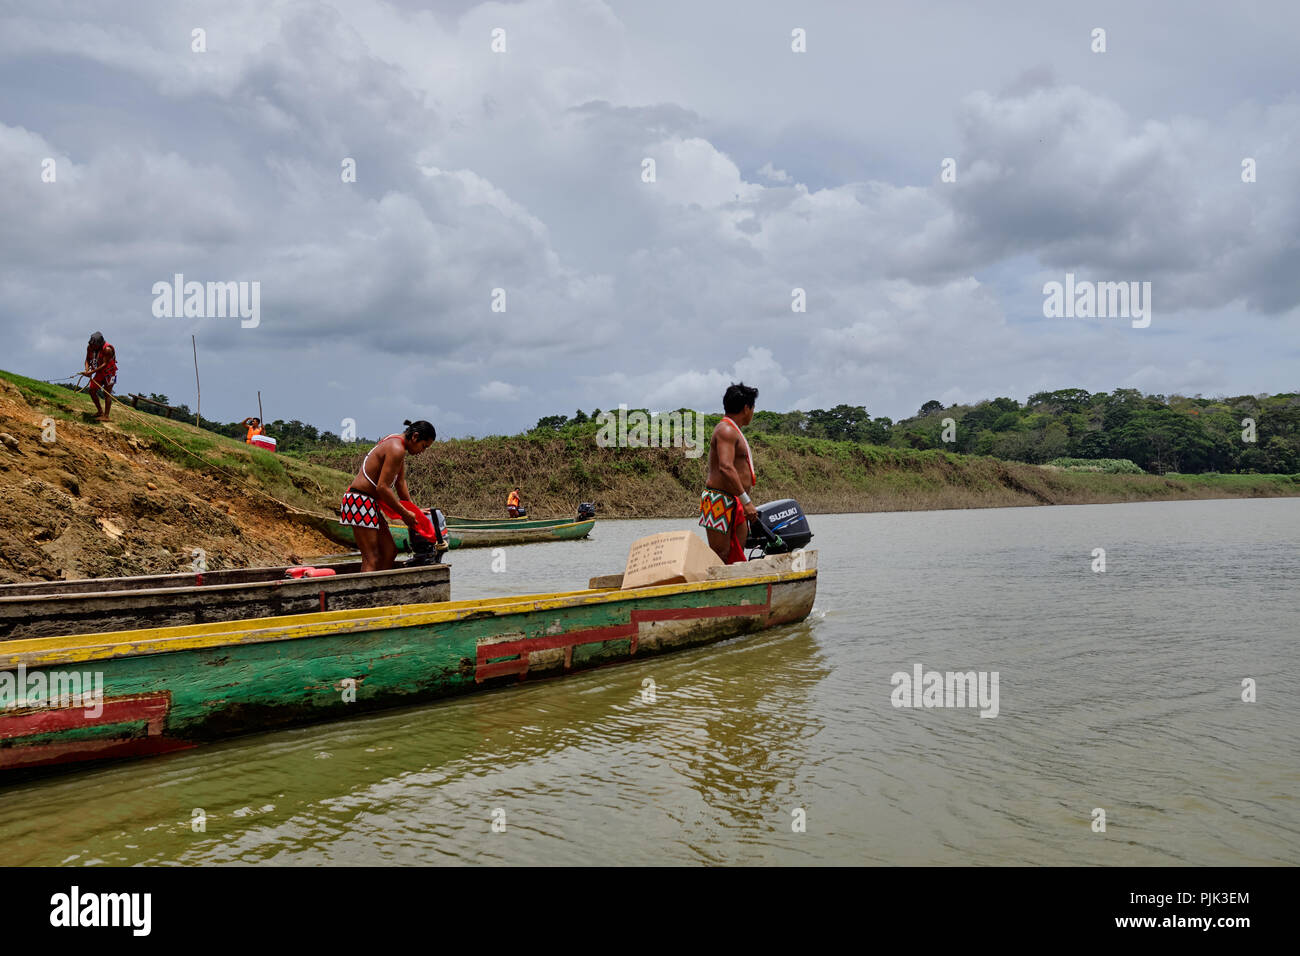 Chagres National Park, Panama - April 22, 2018: Native Embera people steering a dugout canoe along the river Stock Photo